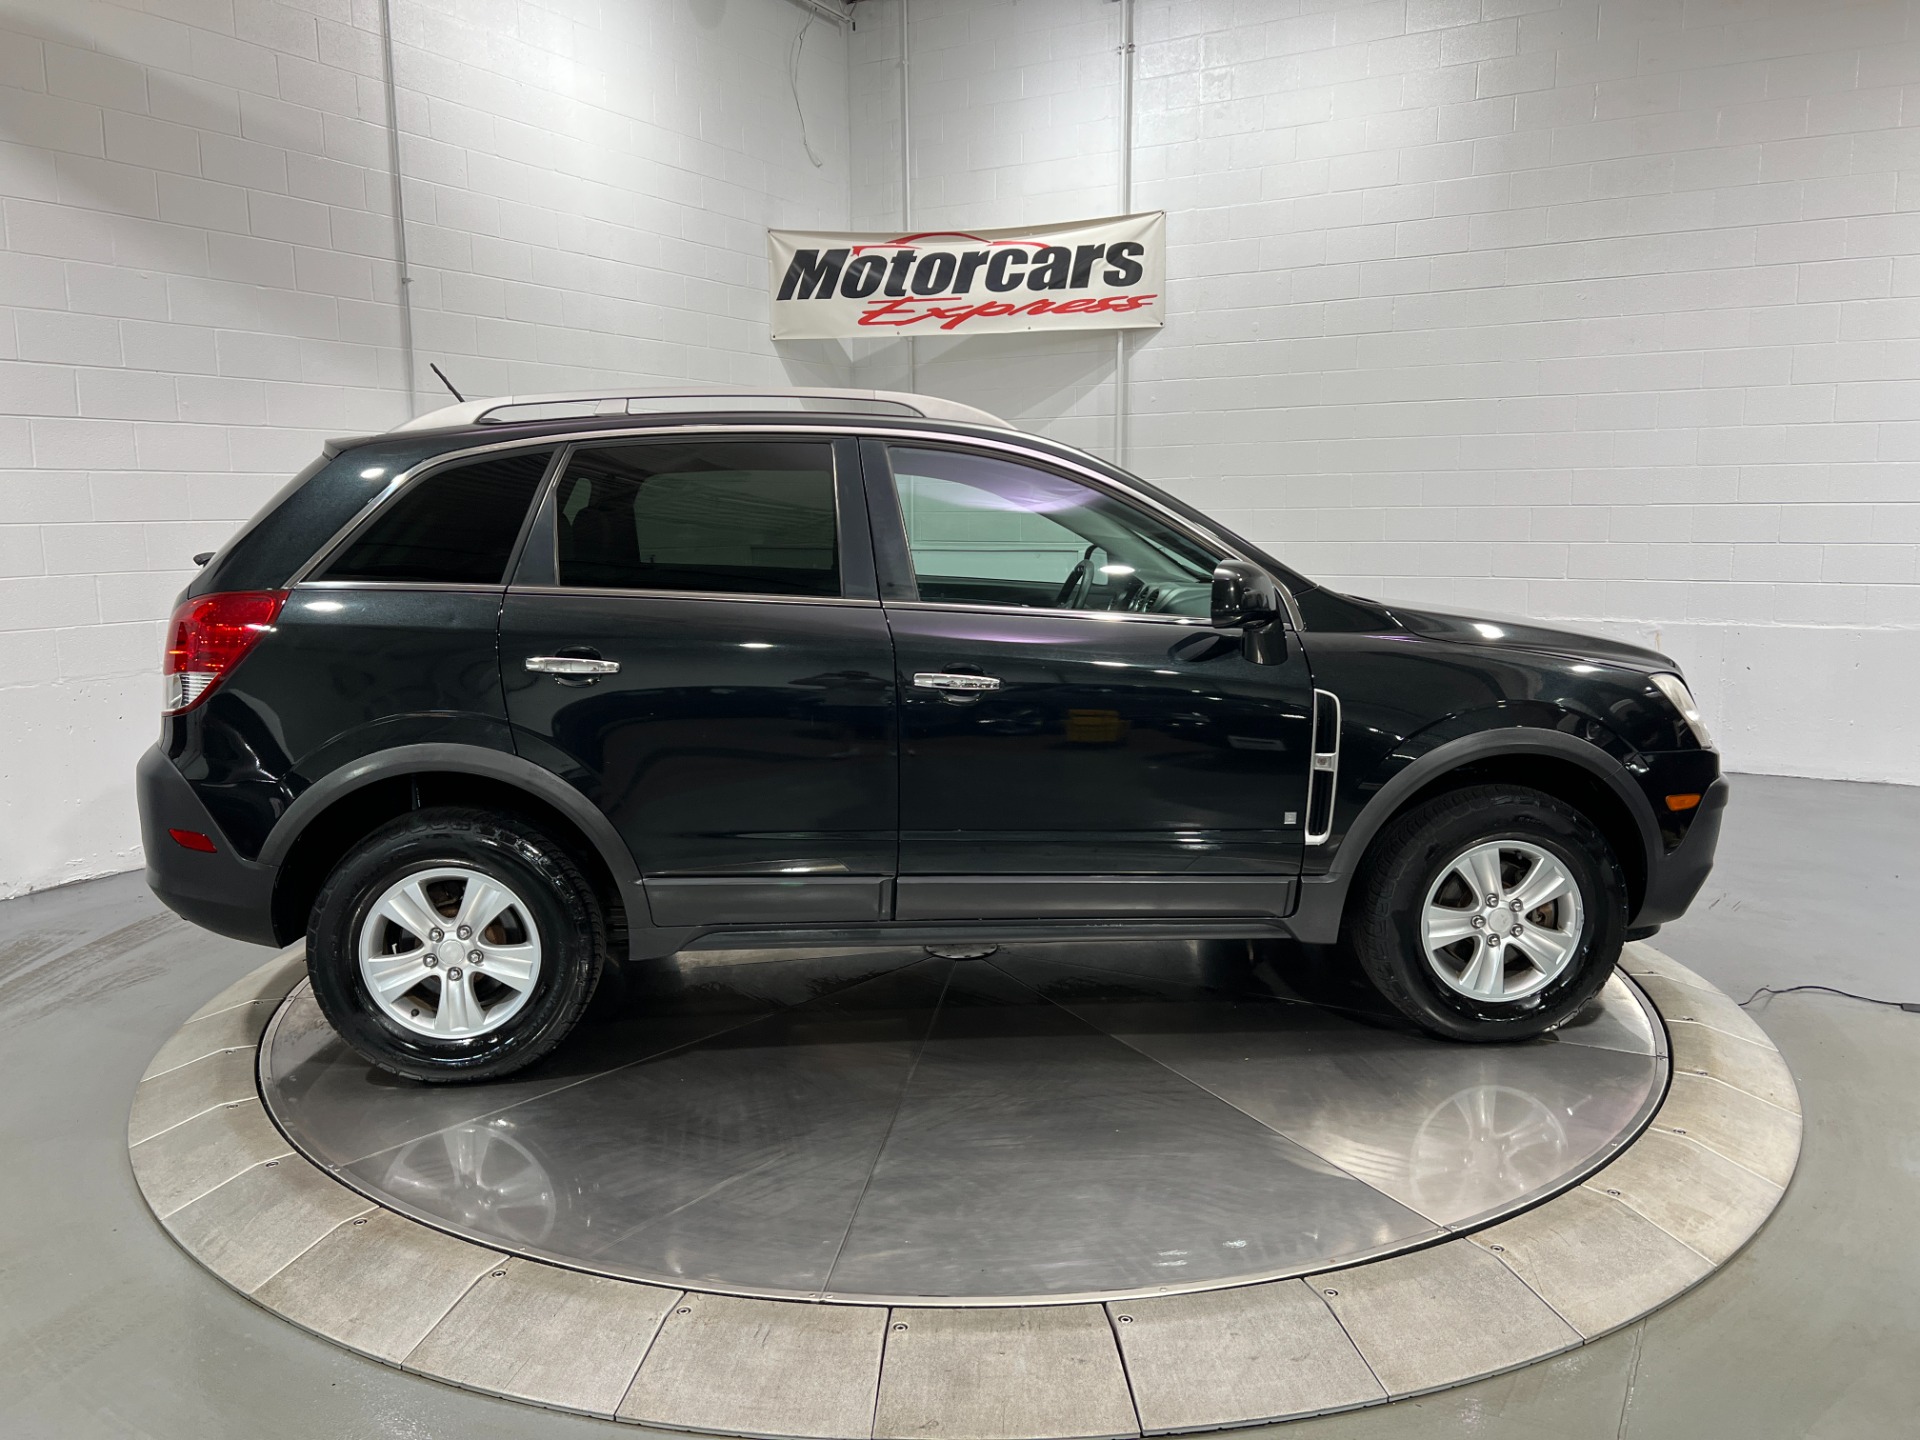 Used-2008-Saturn-Vue-XE-FWD